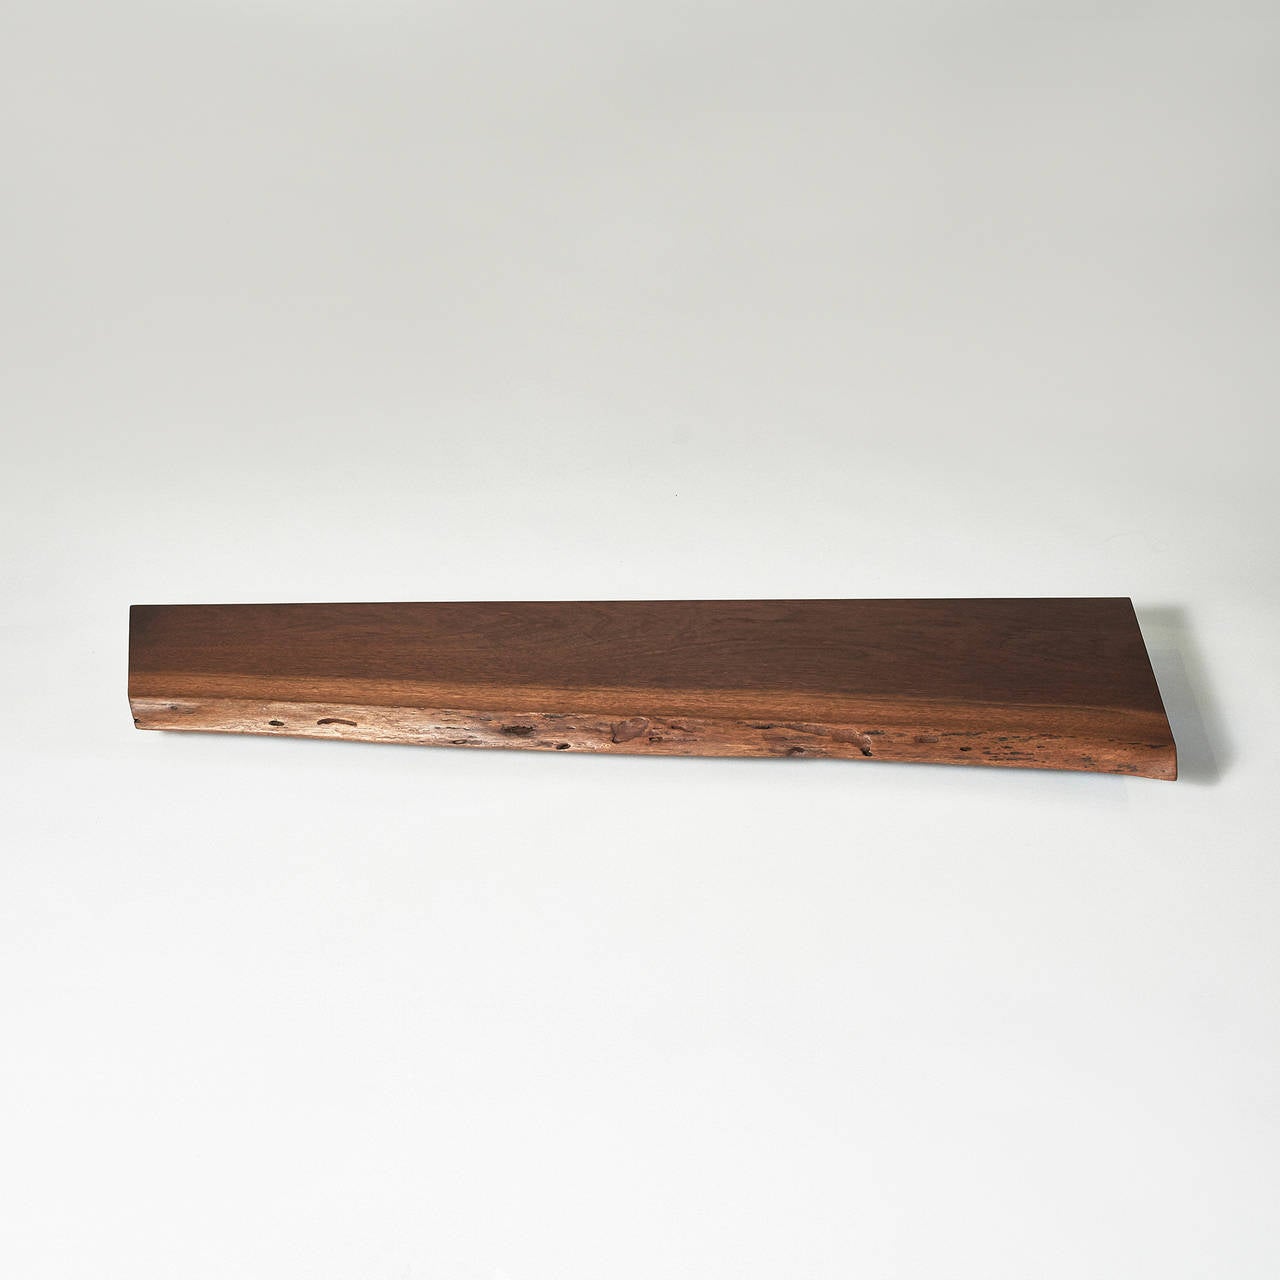 A beautiful free edge walnut wall-mounted shelf measuring 46 inches in width. Excellent original condition. The shelf is accompanied by the original client's receipt from 1957 and a letter of authenticity, both from the Nakashima Studio. 

